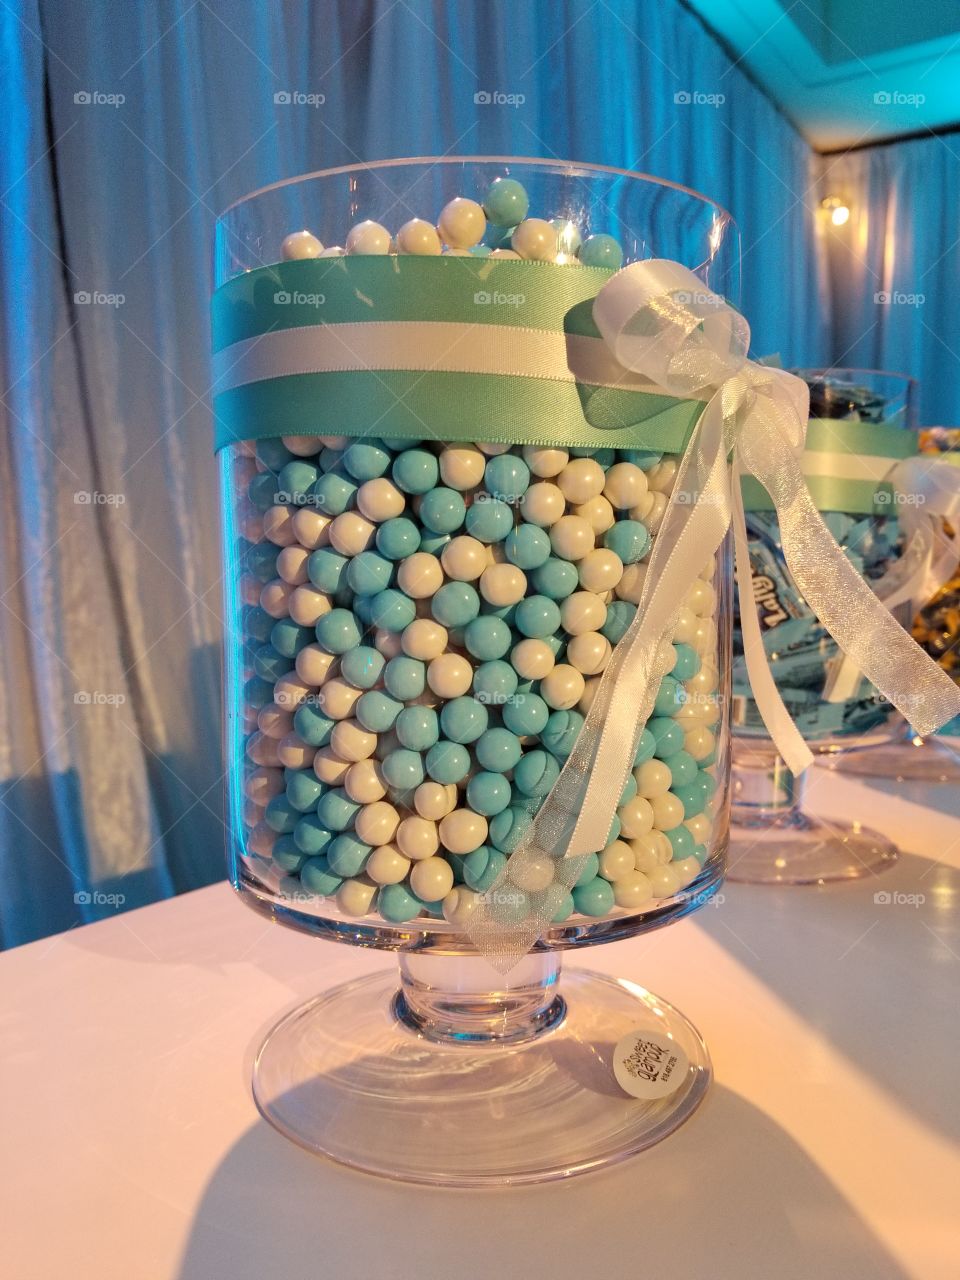 Branded event colors at dessert table